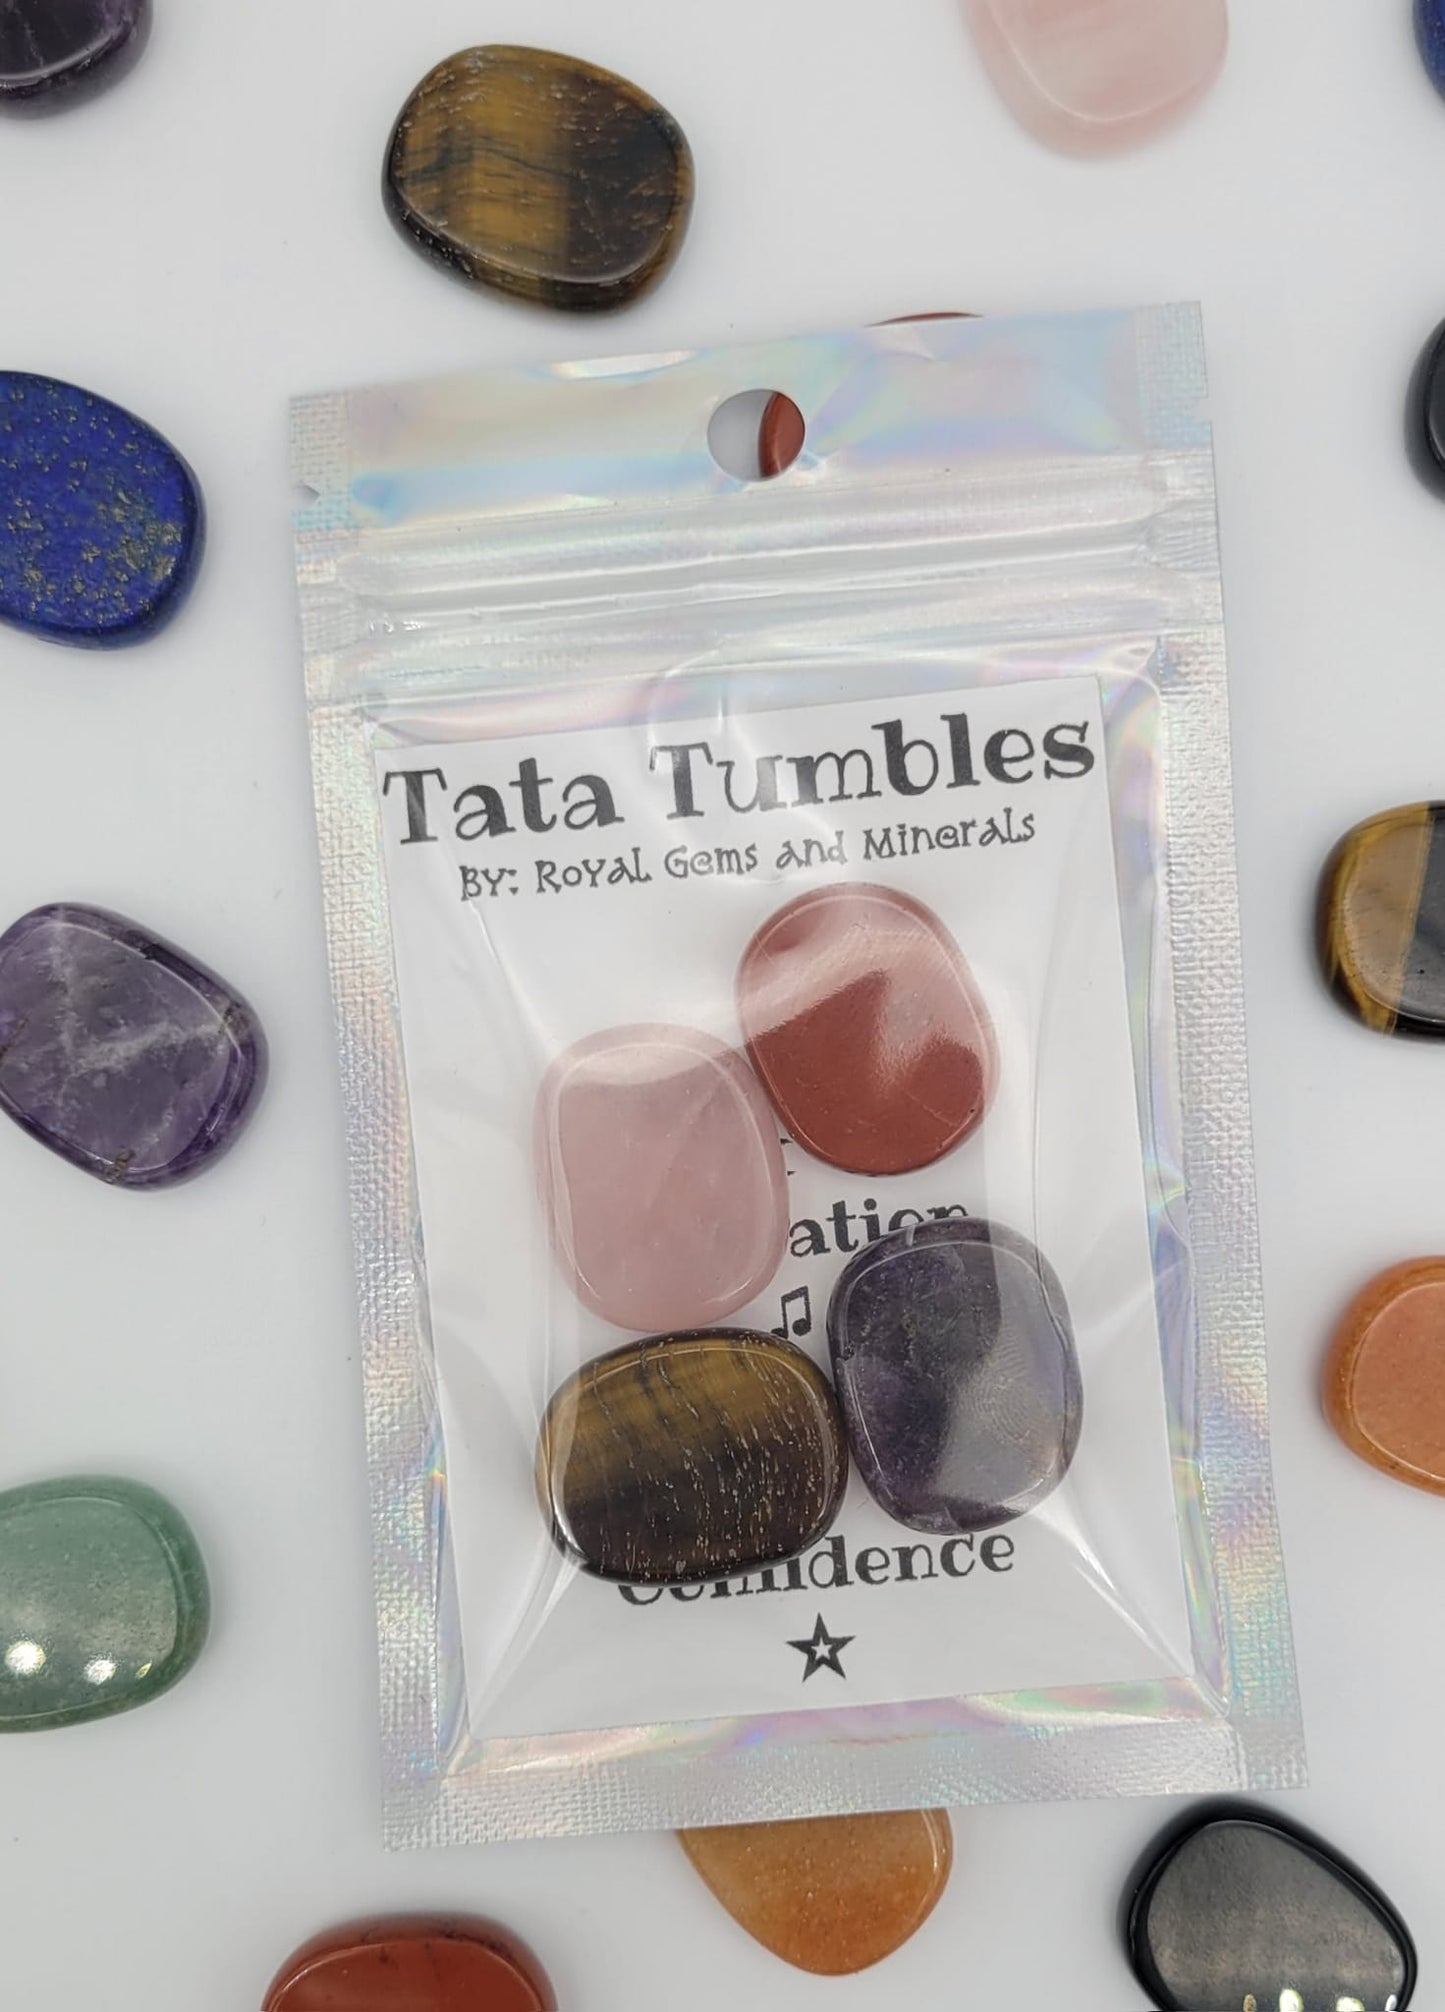 TaTa Tumble Crystal Sets - Crystals to Wear in Your Bra